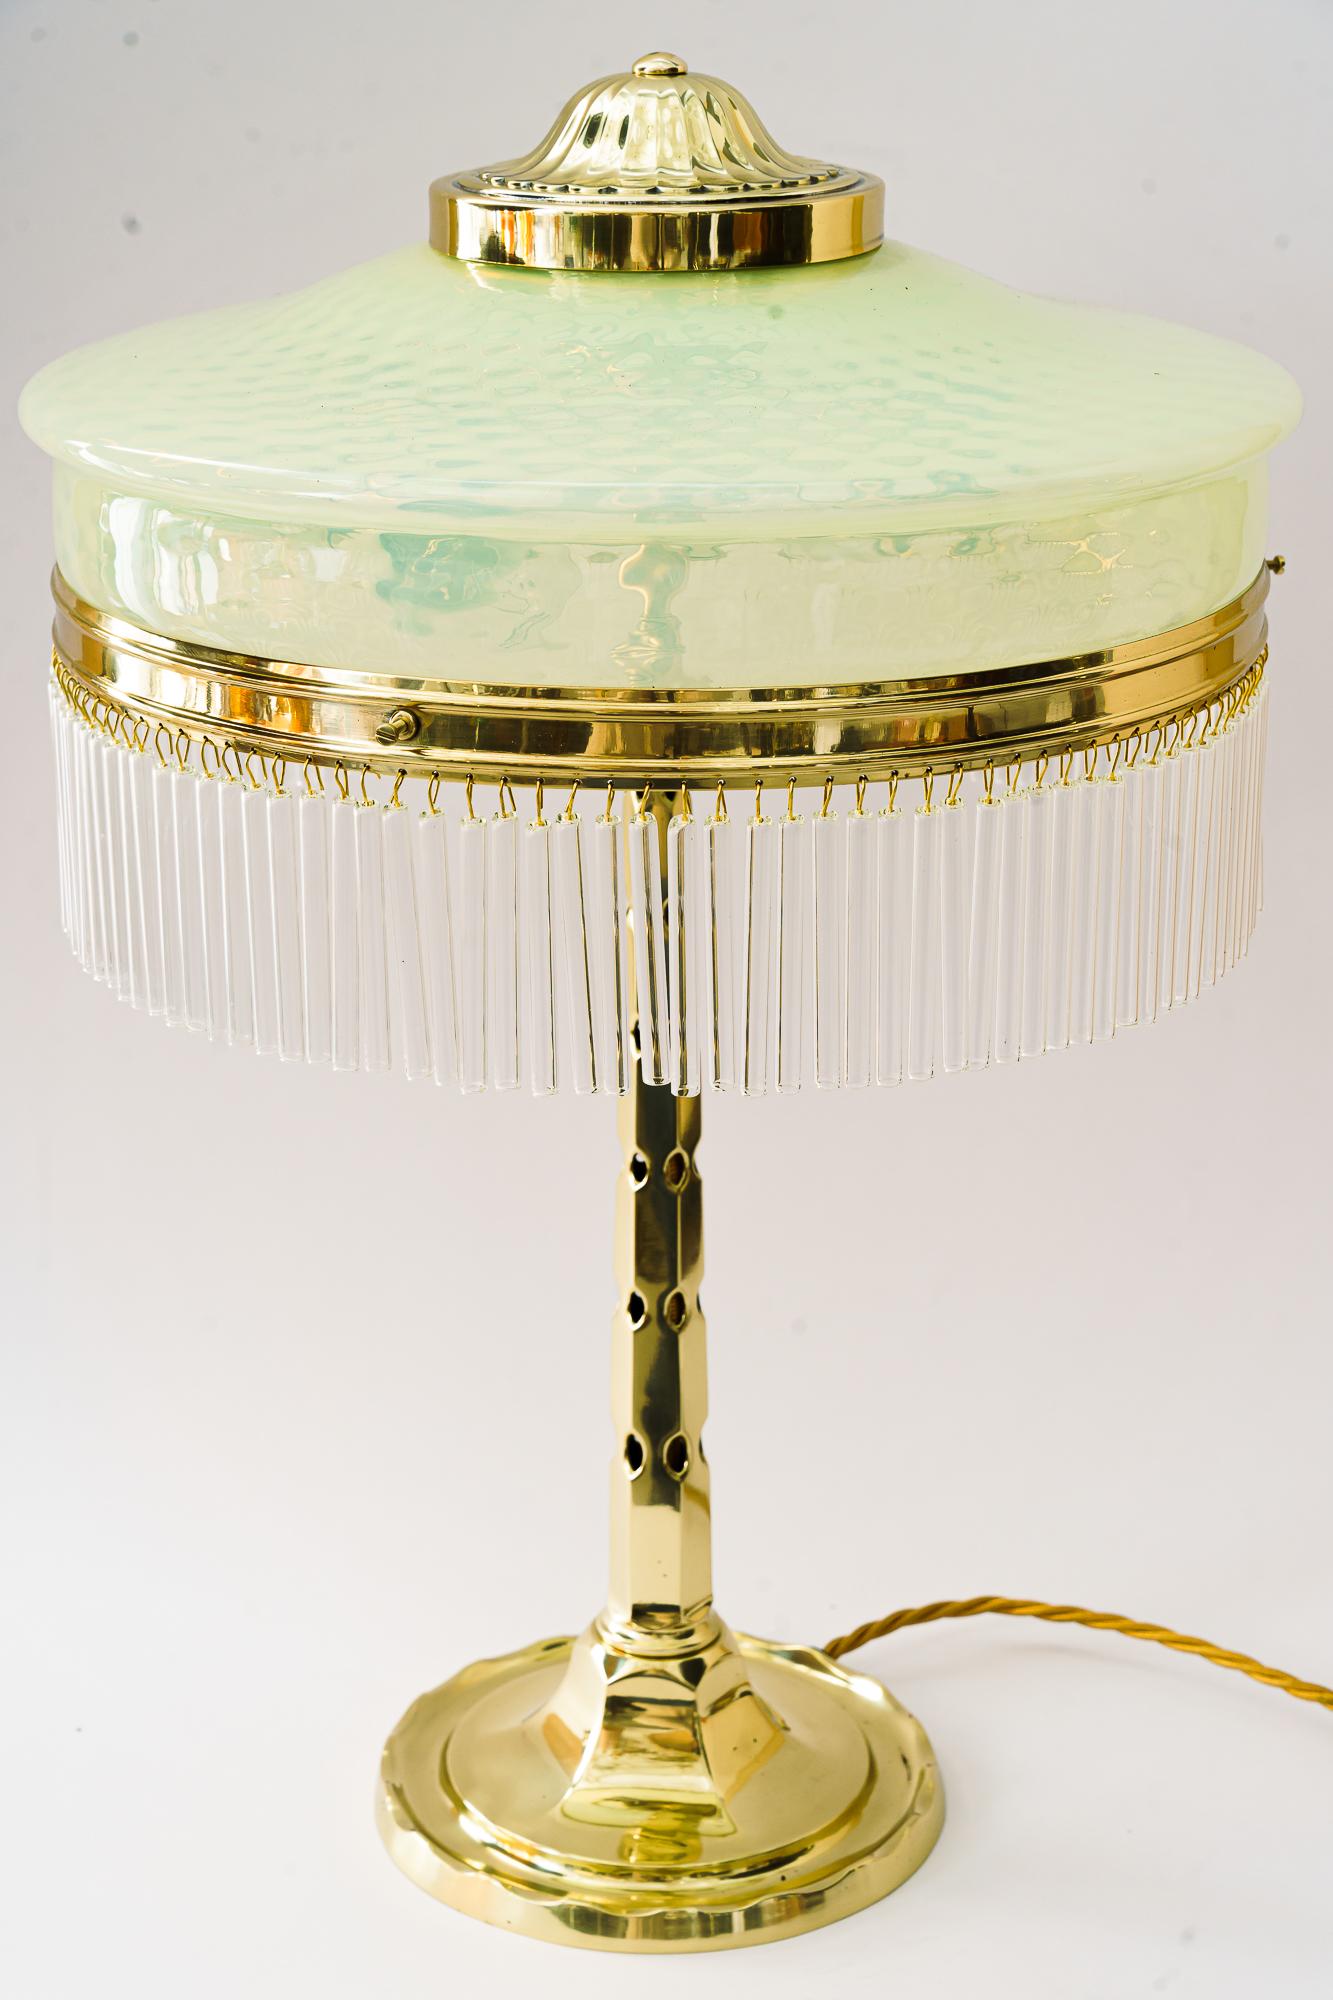 Art Deco table lamp with originla opaline glass shade vienna around 1920s 
Polished and stove enameled
Original opaline glass shade
The glass sticks are replaced ( new ).